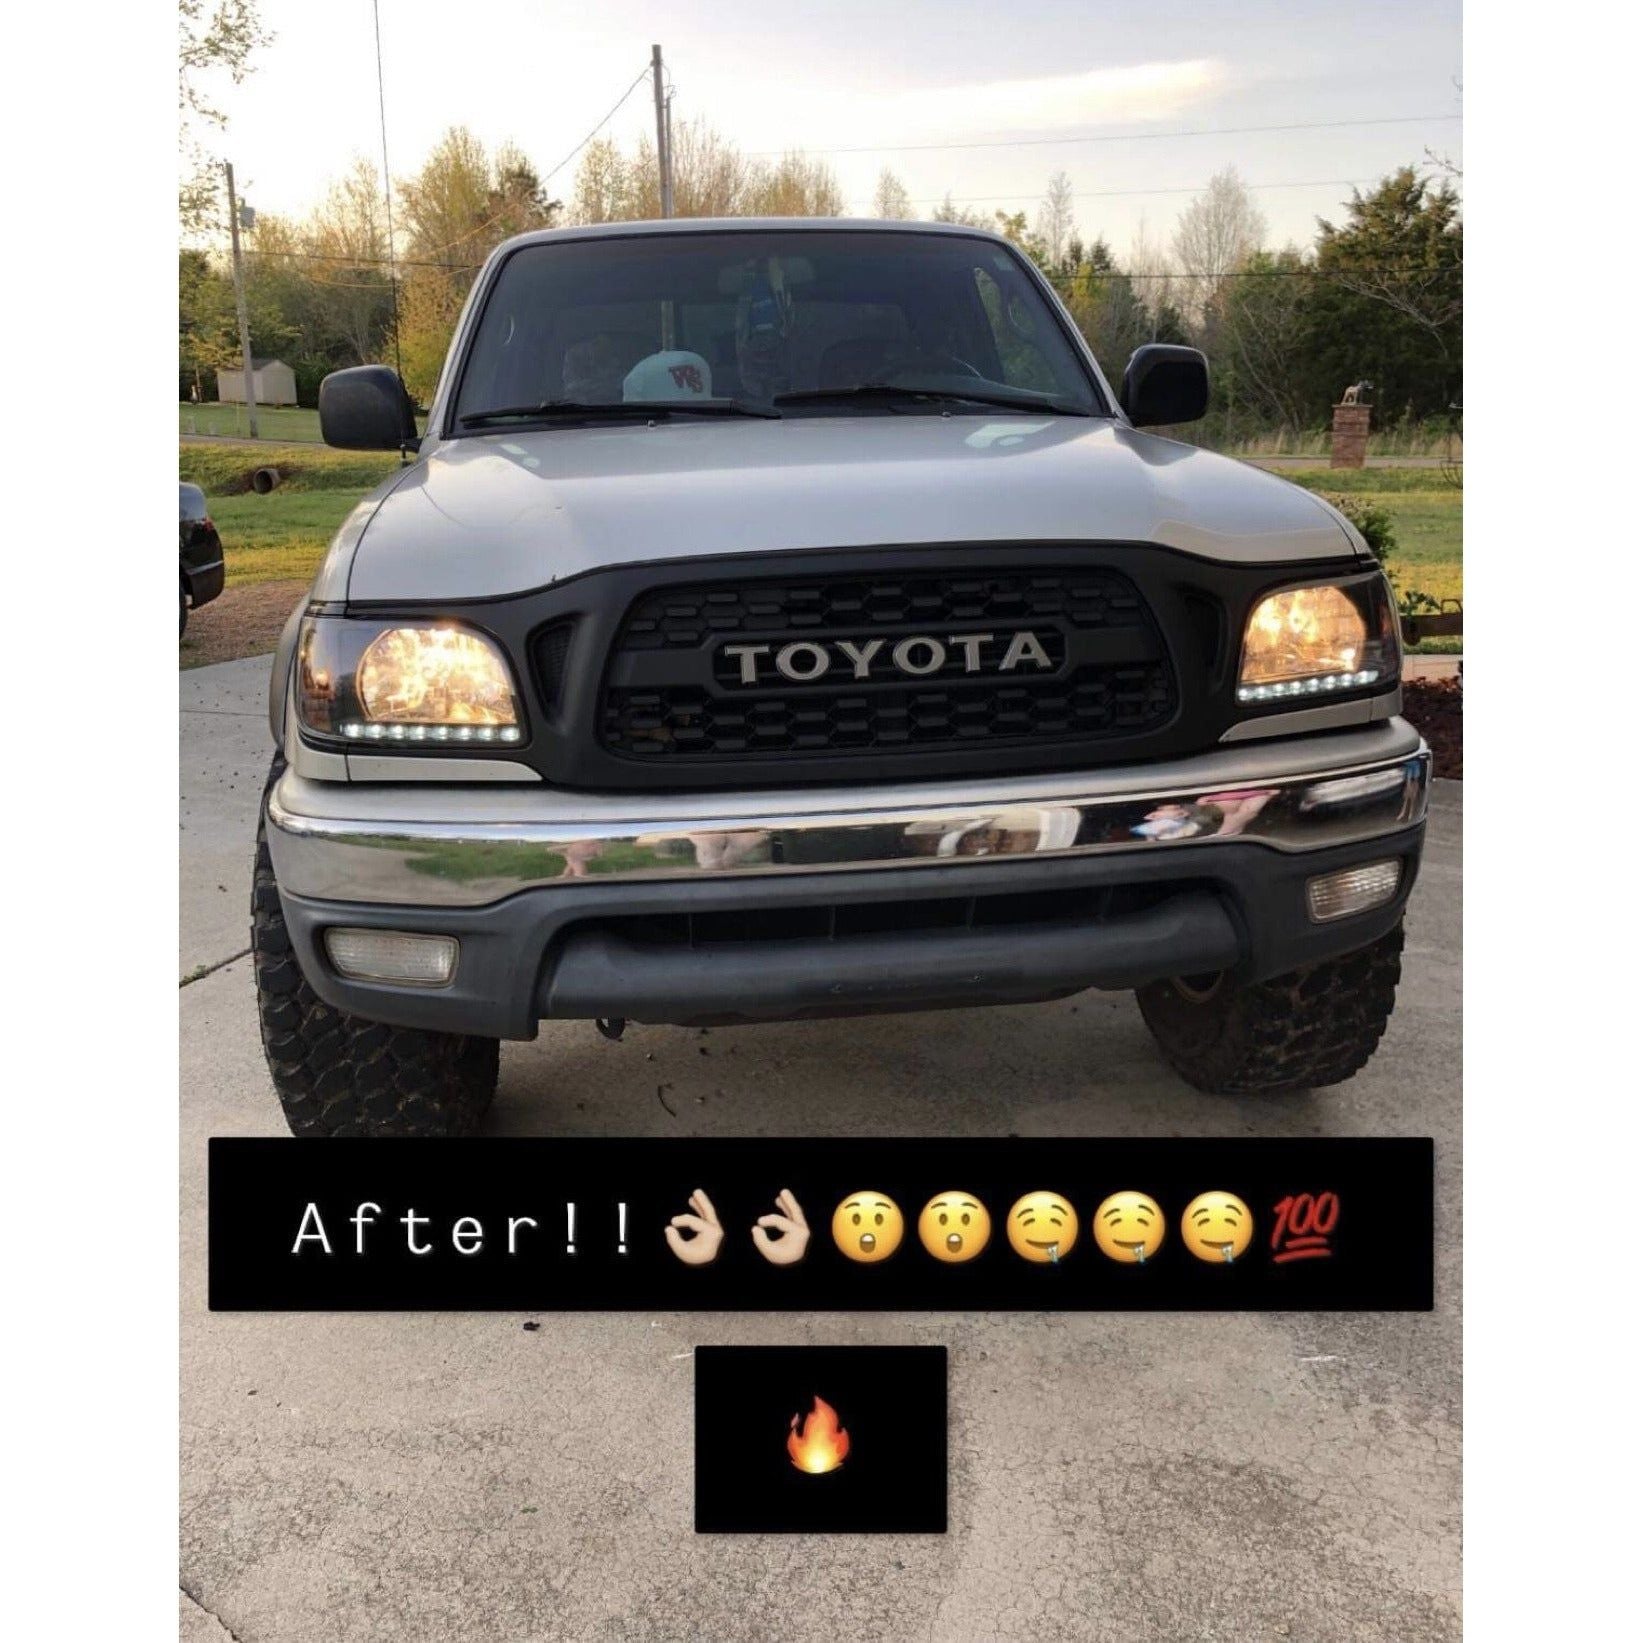 2001-2004 Toyota Tacoma | TRD Pro Style Grille - Truck Accessories Guy